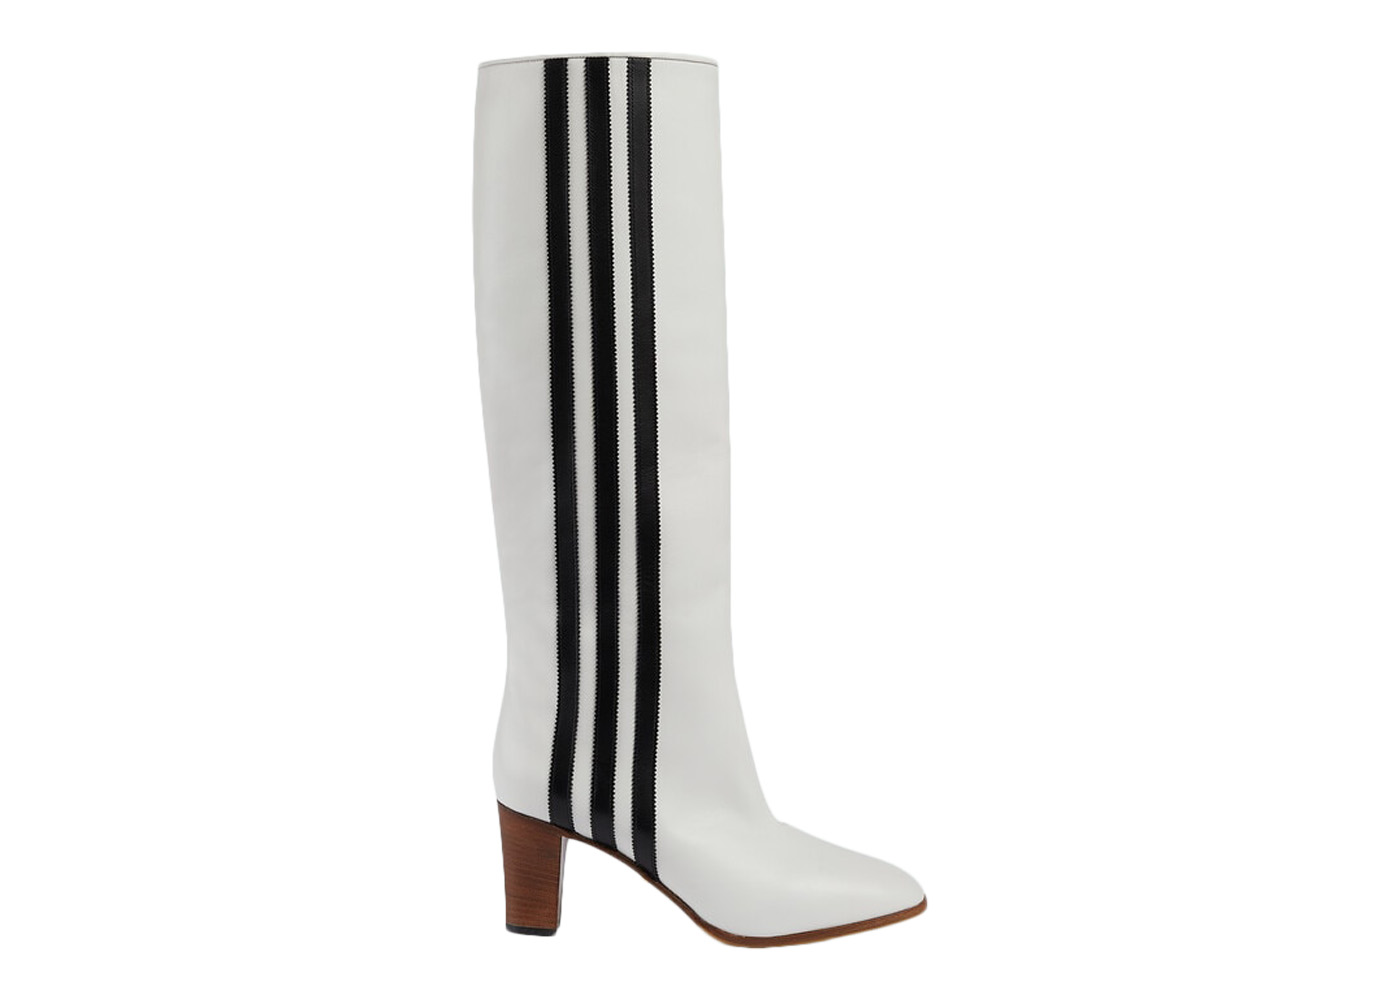 adidas x Gucci 73mm Knee-High Boots White Leather - 715584 BKOU0 